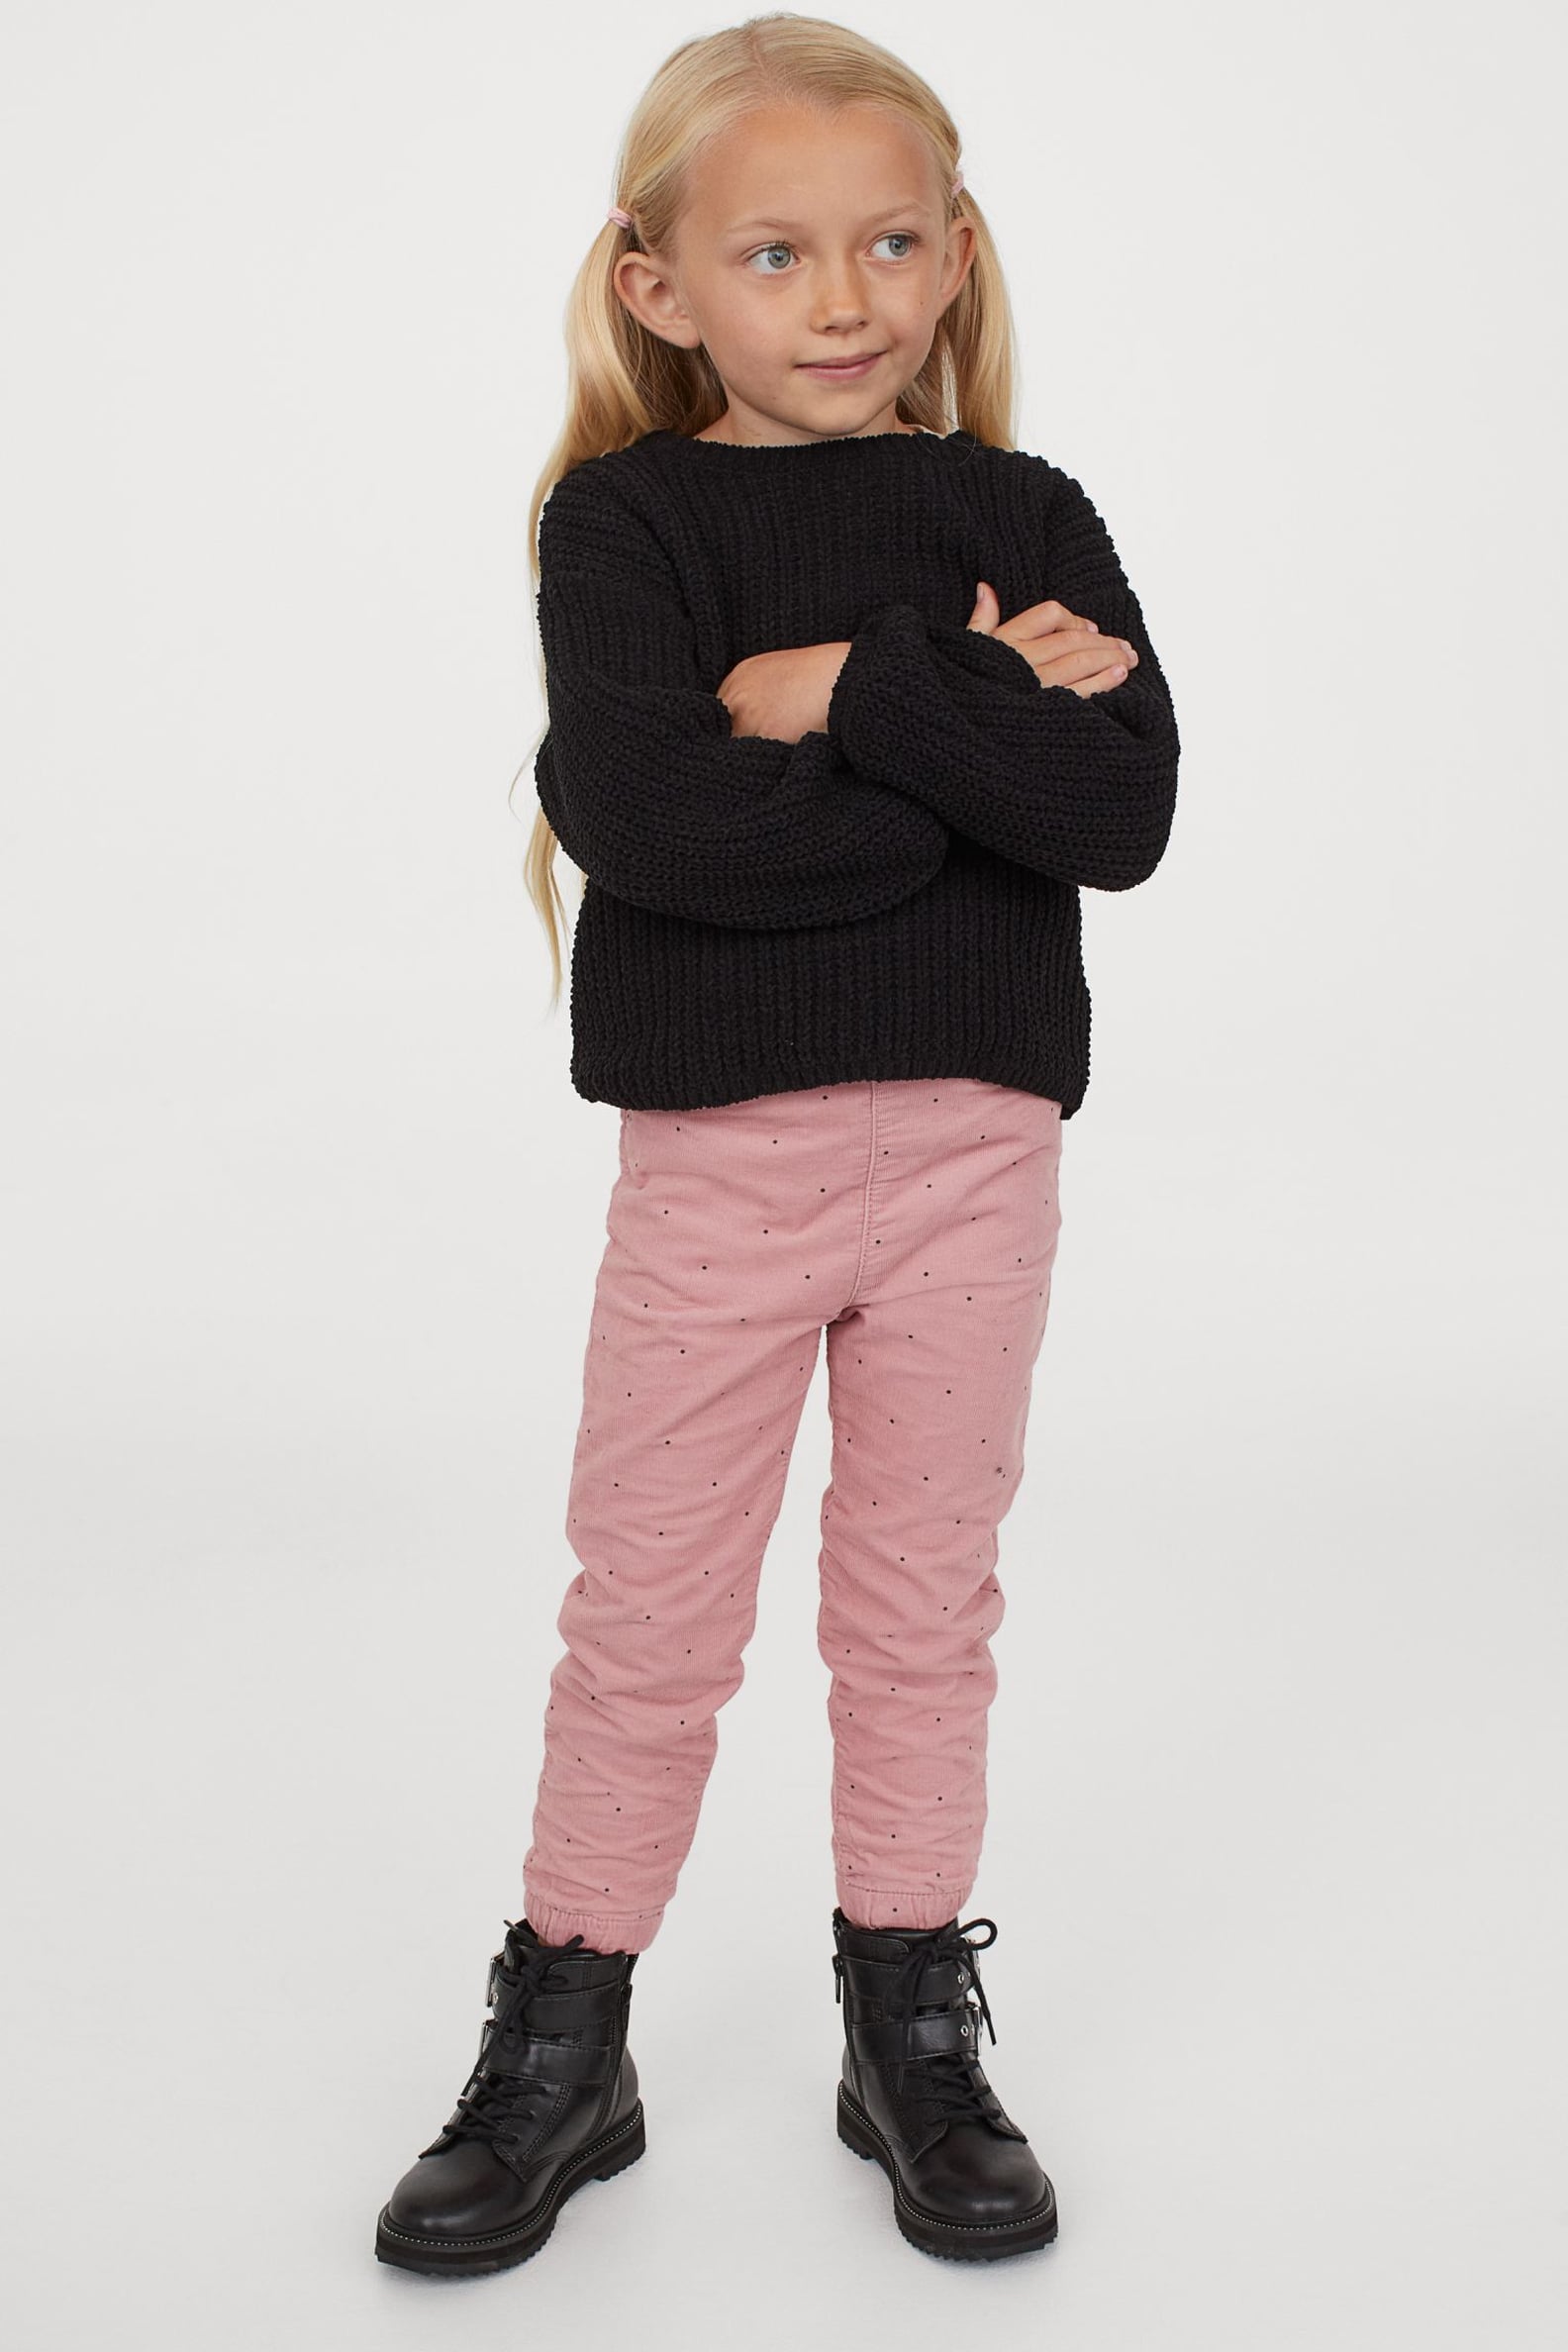 Affordable Pants Your Kid Can Wear With Everything | POPSUGAR Family